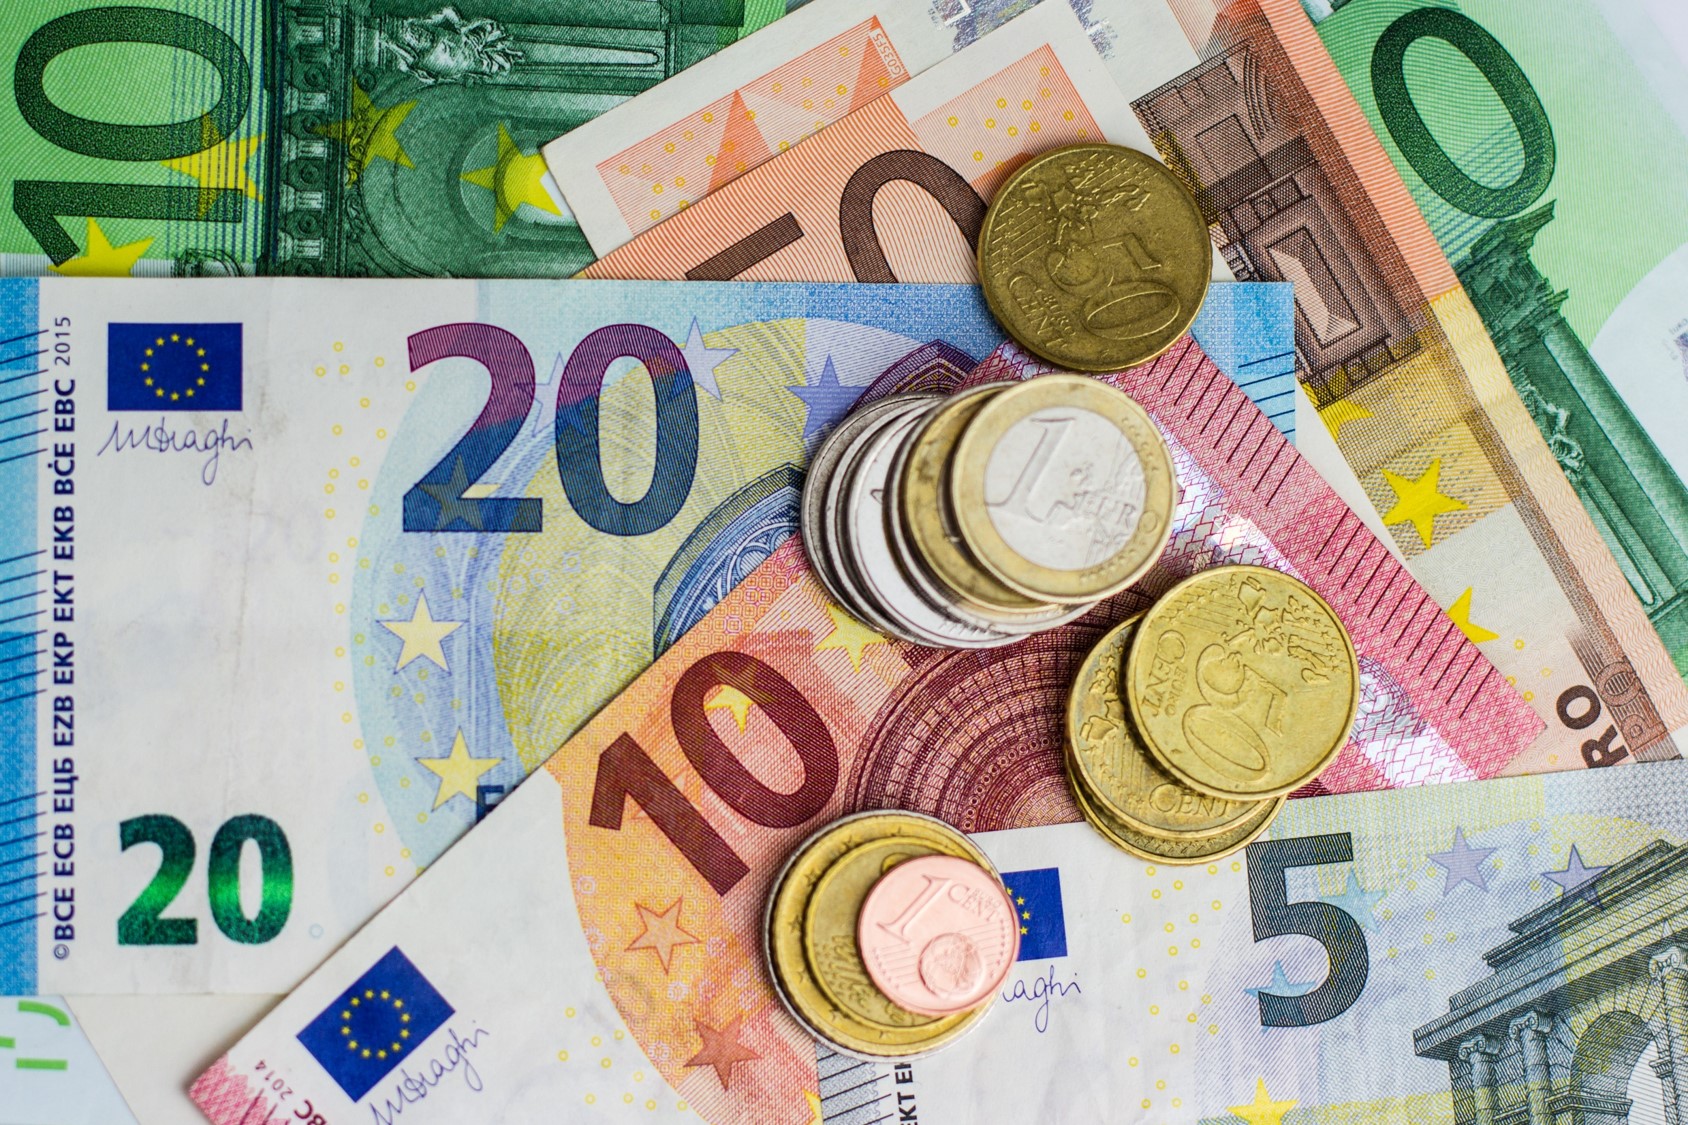 Euro continues to struggle against other major currencies